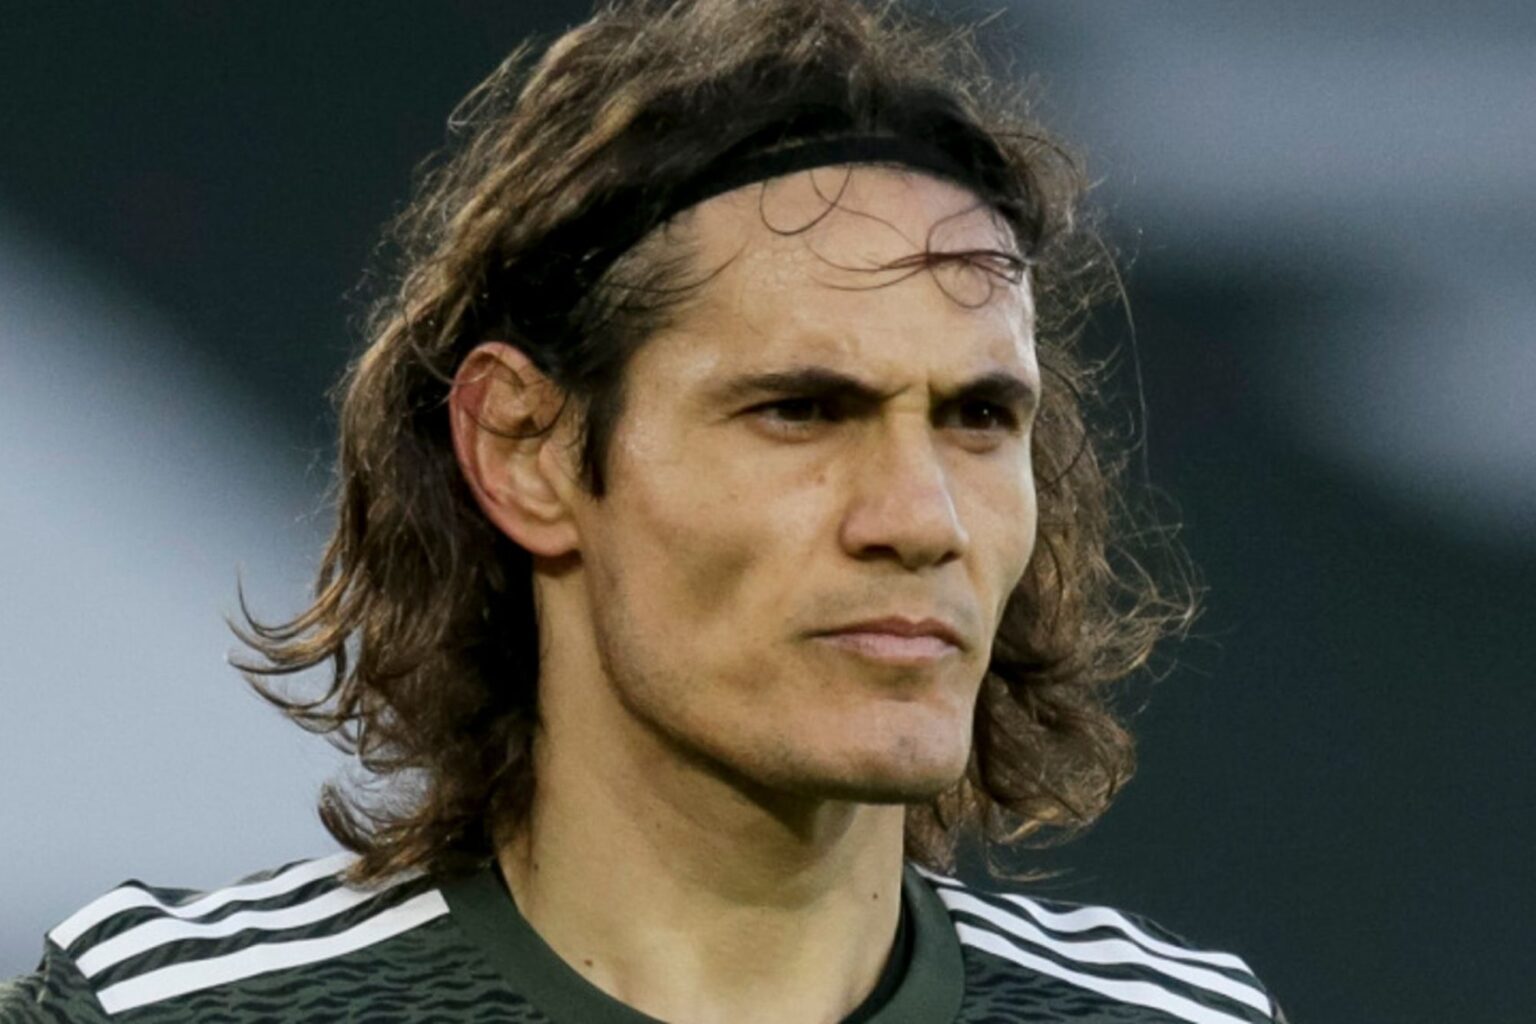 Uruguayan soccer player Edinson Cavani landed himself in hot water. What's the history behind racism in the world's most popular sport?